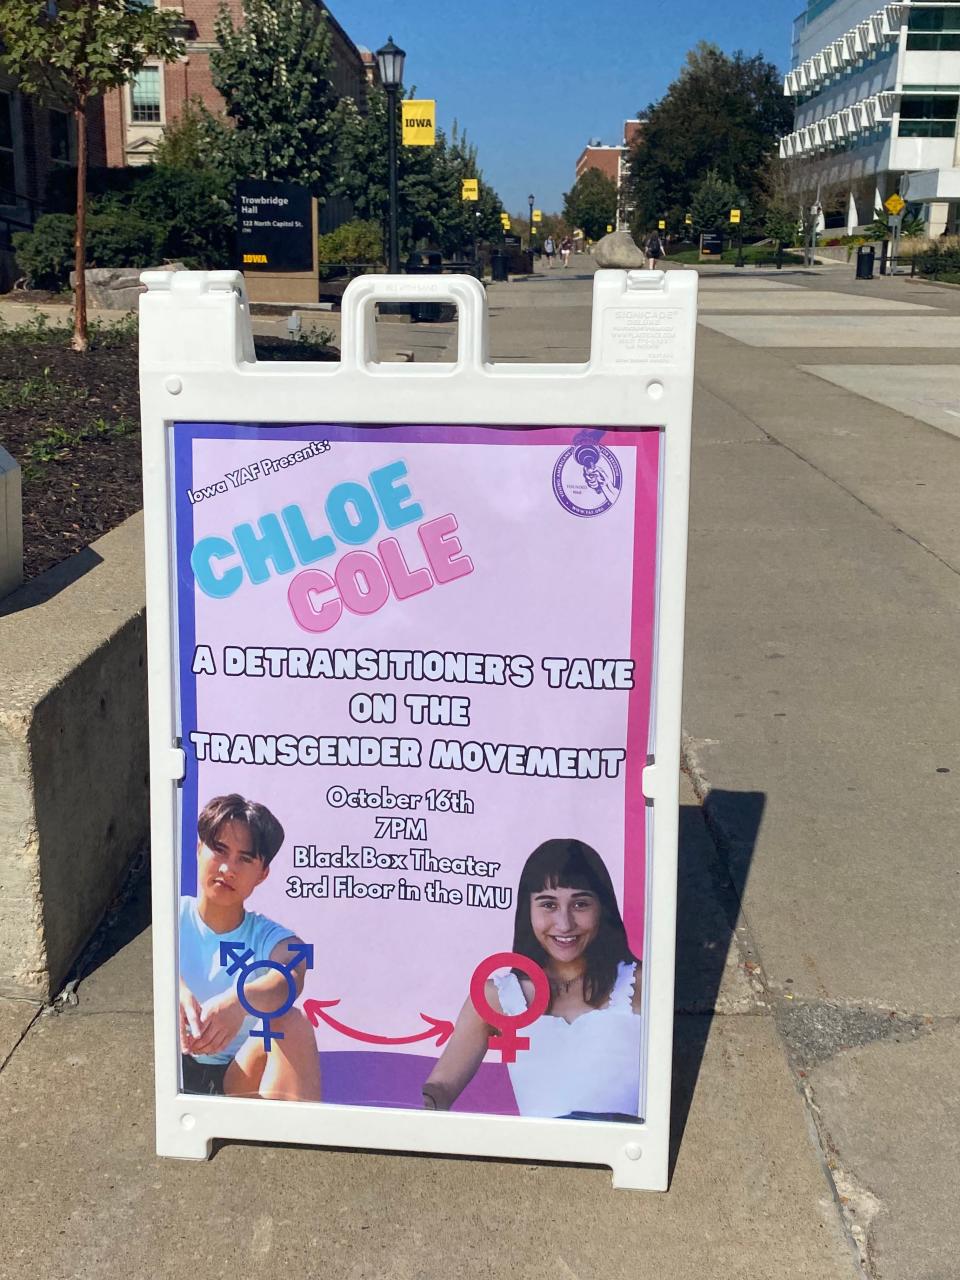 The A-Frame poster and sign for the Chloe Cole event, which the University of Iowa Young Americans for Freedom says was run over by students, who then stole the poster inside.